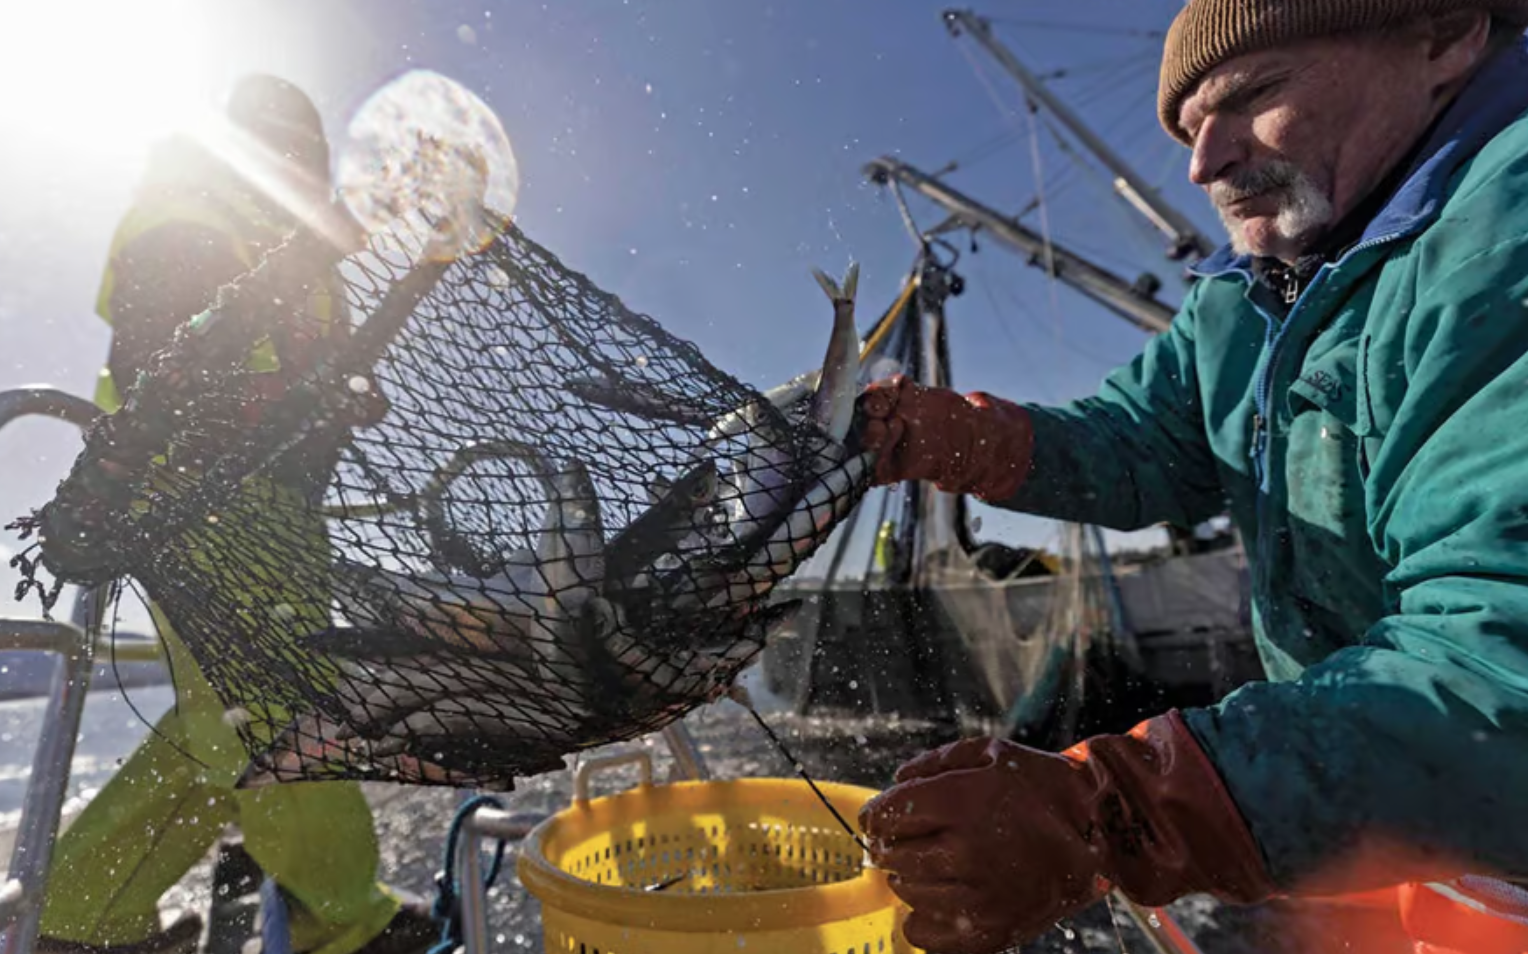 Net positive? Paul Salomone, a fisheries management biologist, samples herring to help determine whether the fishery should be opened for the day. (Nathaniel Wilder)